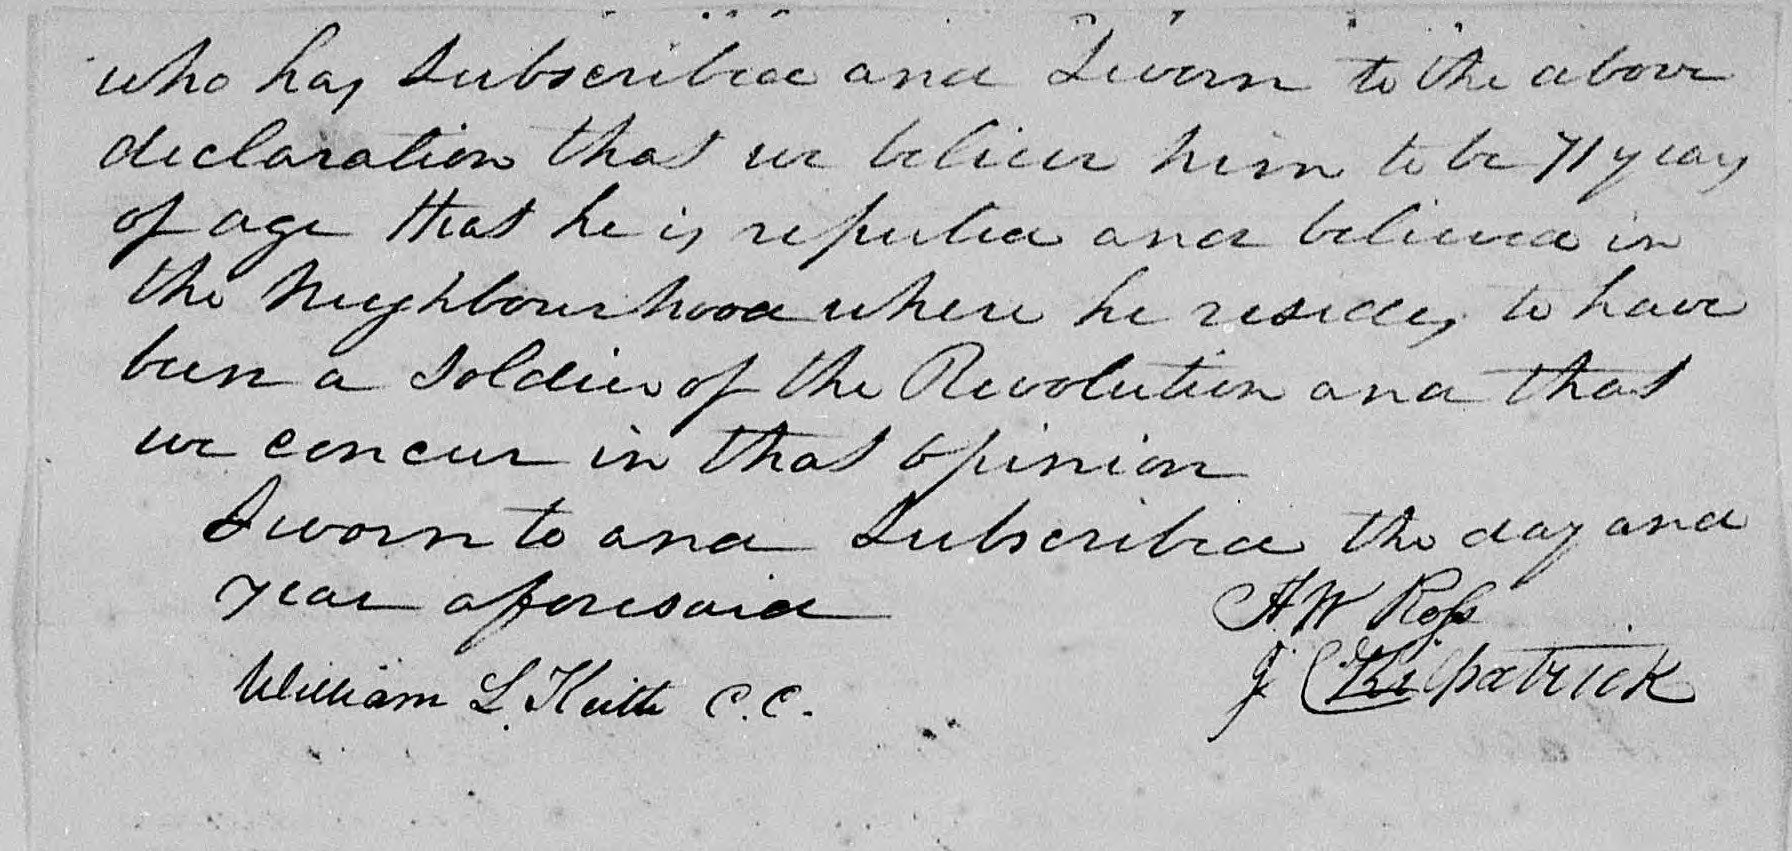 Affidavit of Anthony W. Ross and John C. Kilpatrick in support of a Pension Claim for William Guest, 11 March 1833, page 2